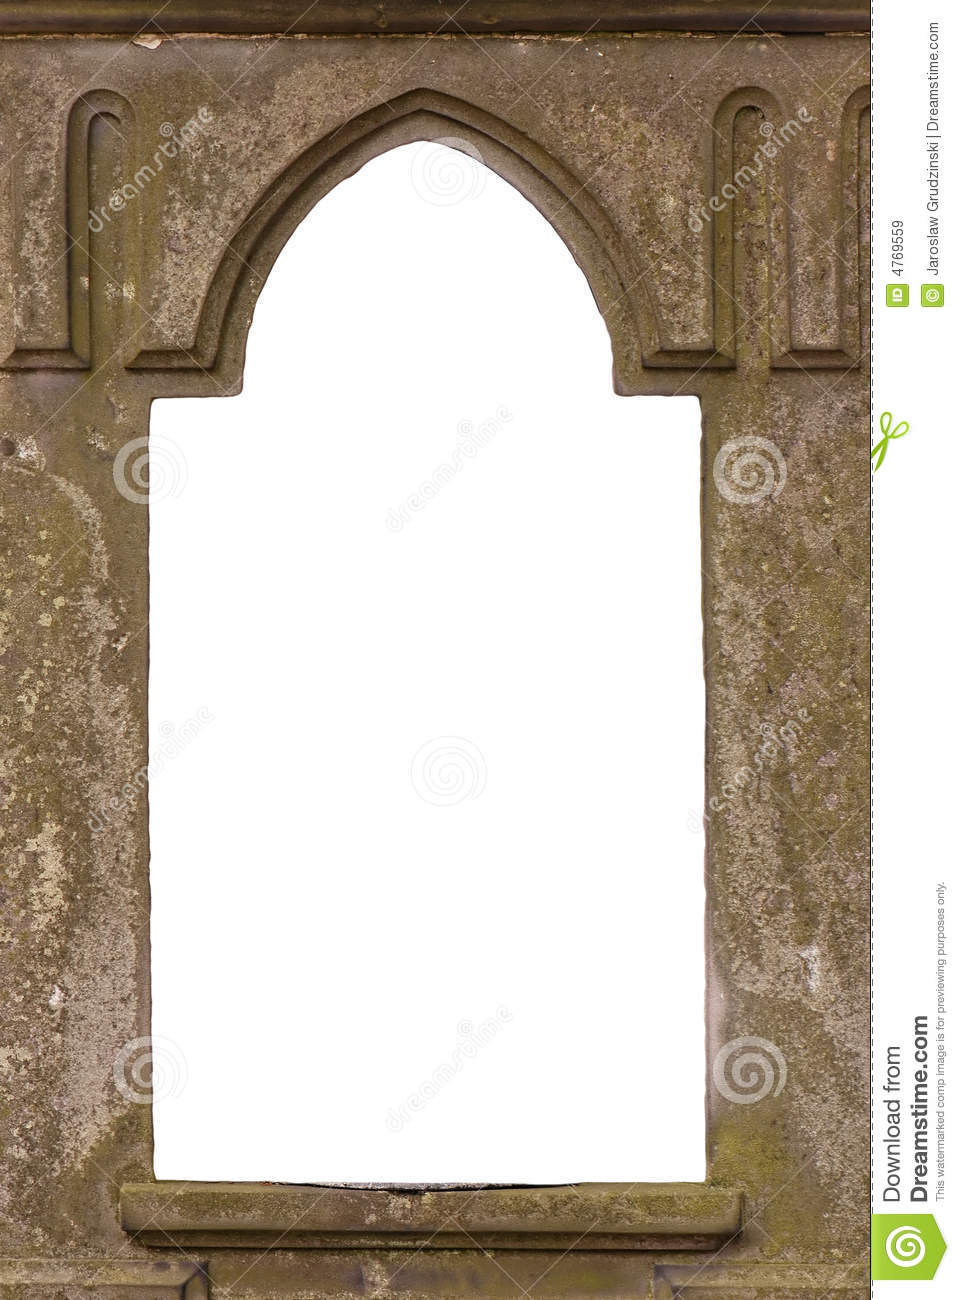 Blank Old Castle Window Royalty Free Stock Images   Image  4769559